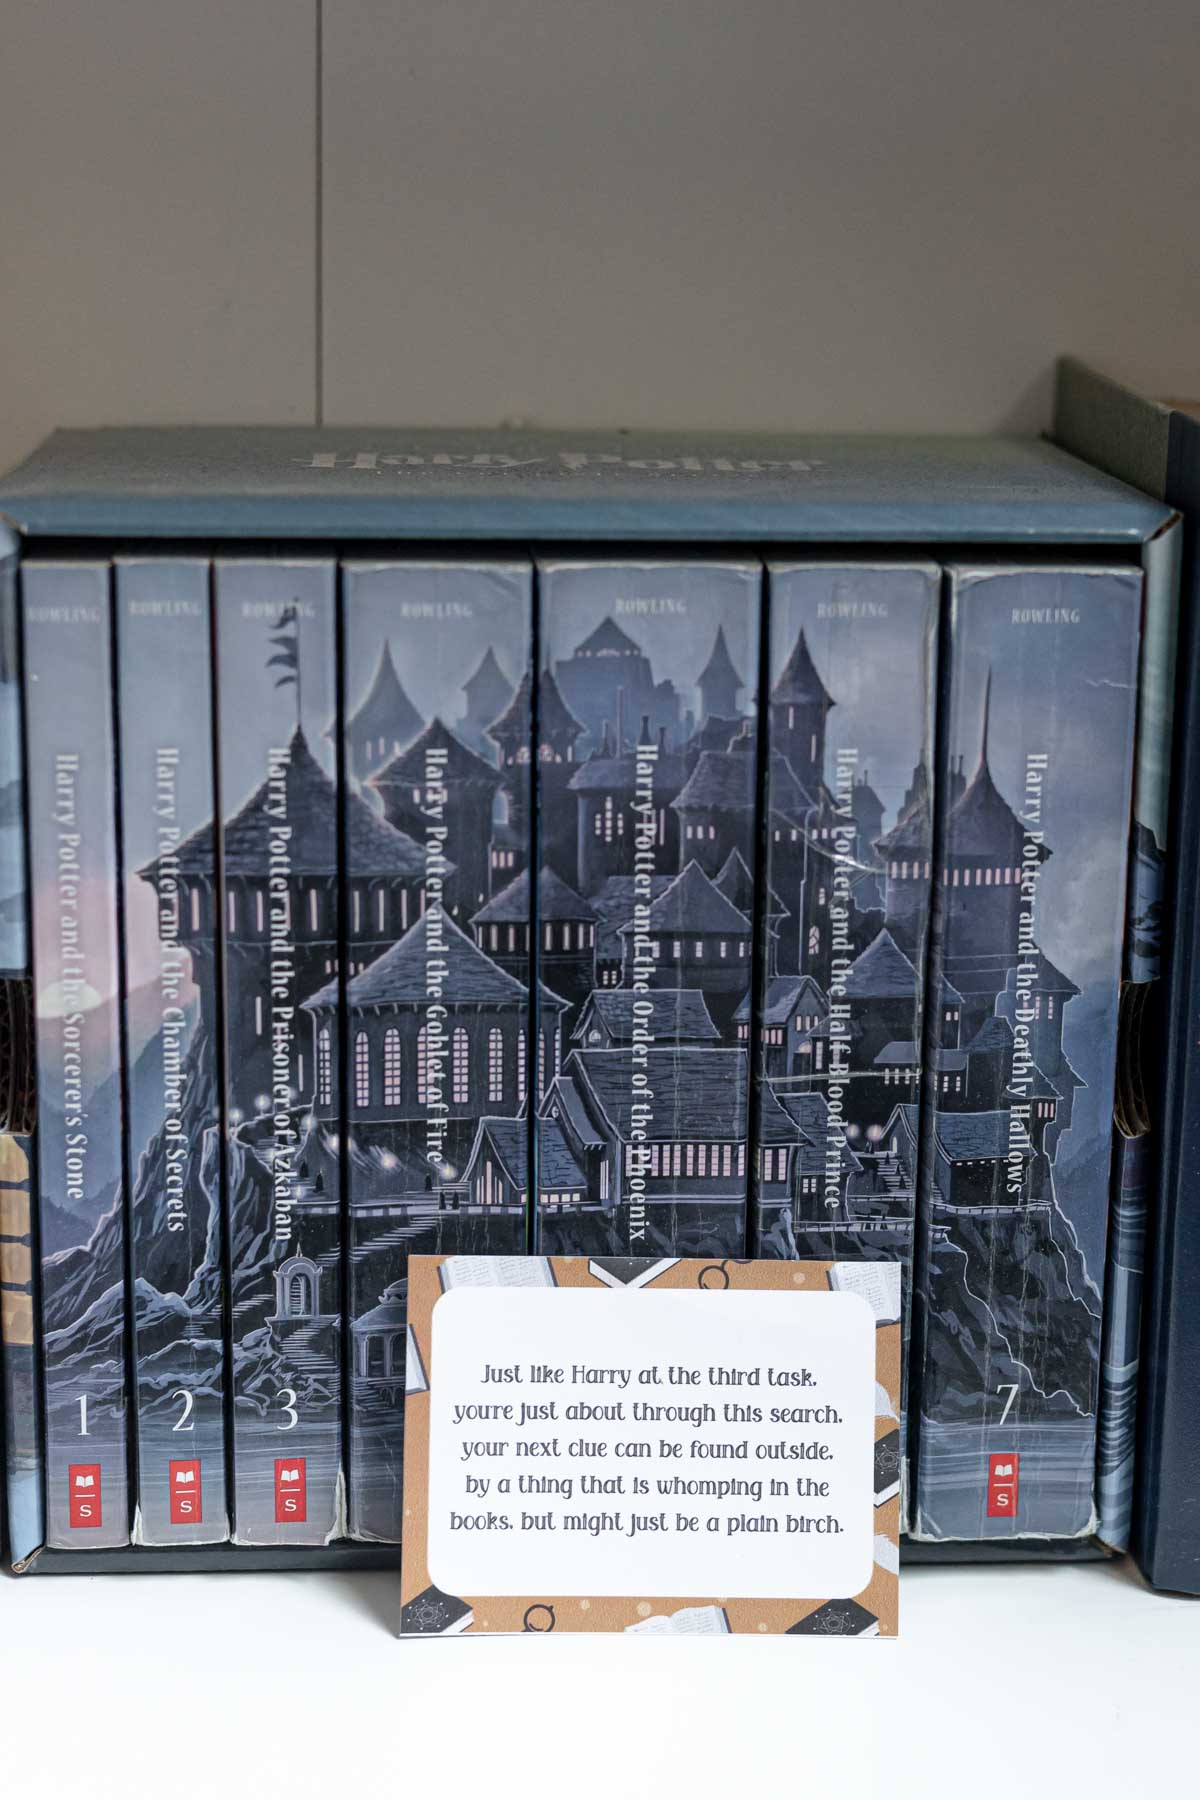 Harry Potter scavenger hunt clues by the books